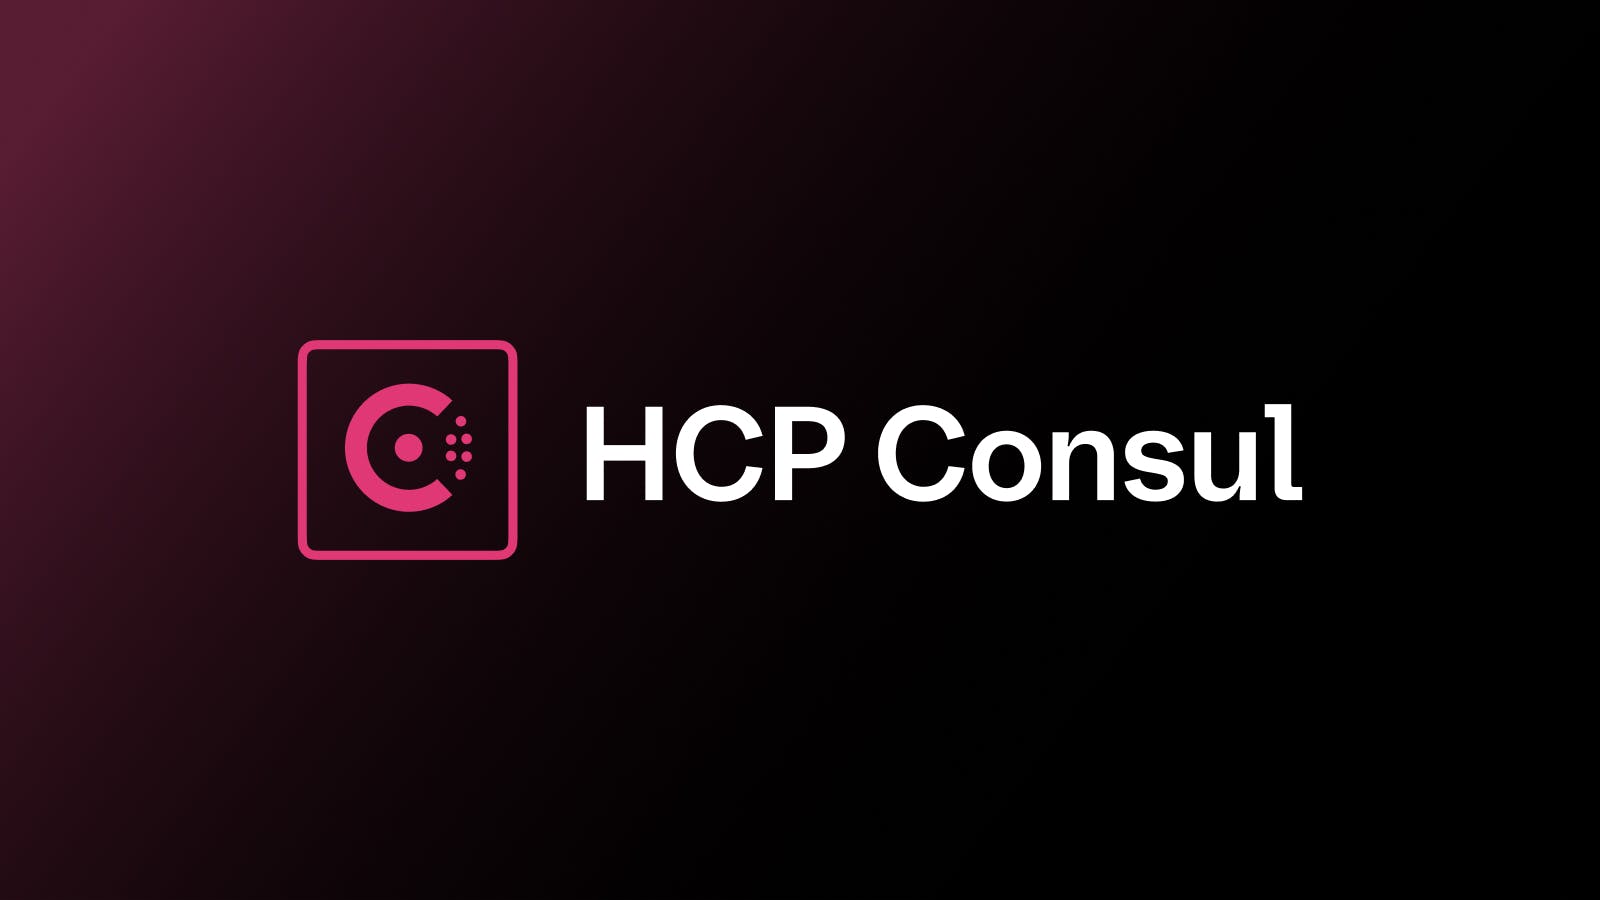 Announcing HCP Consul management plane with  cloud-based observability